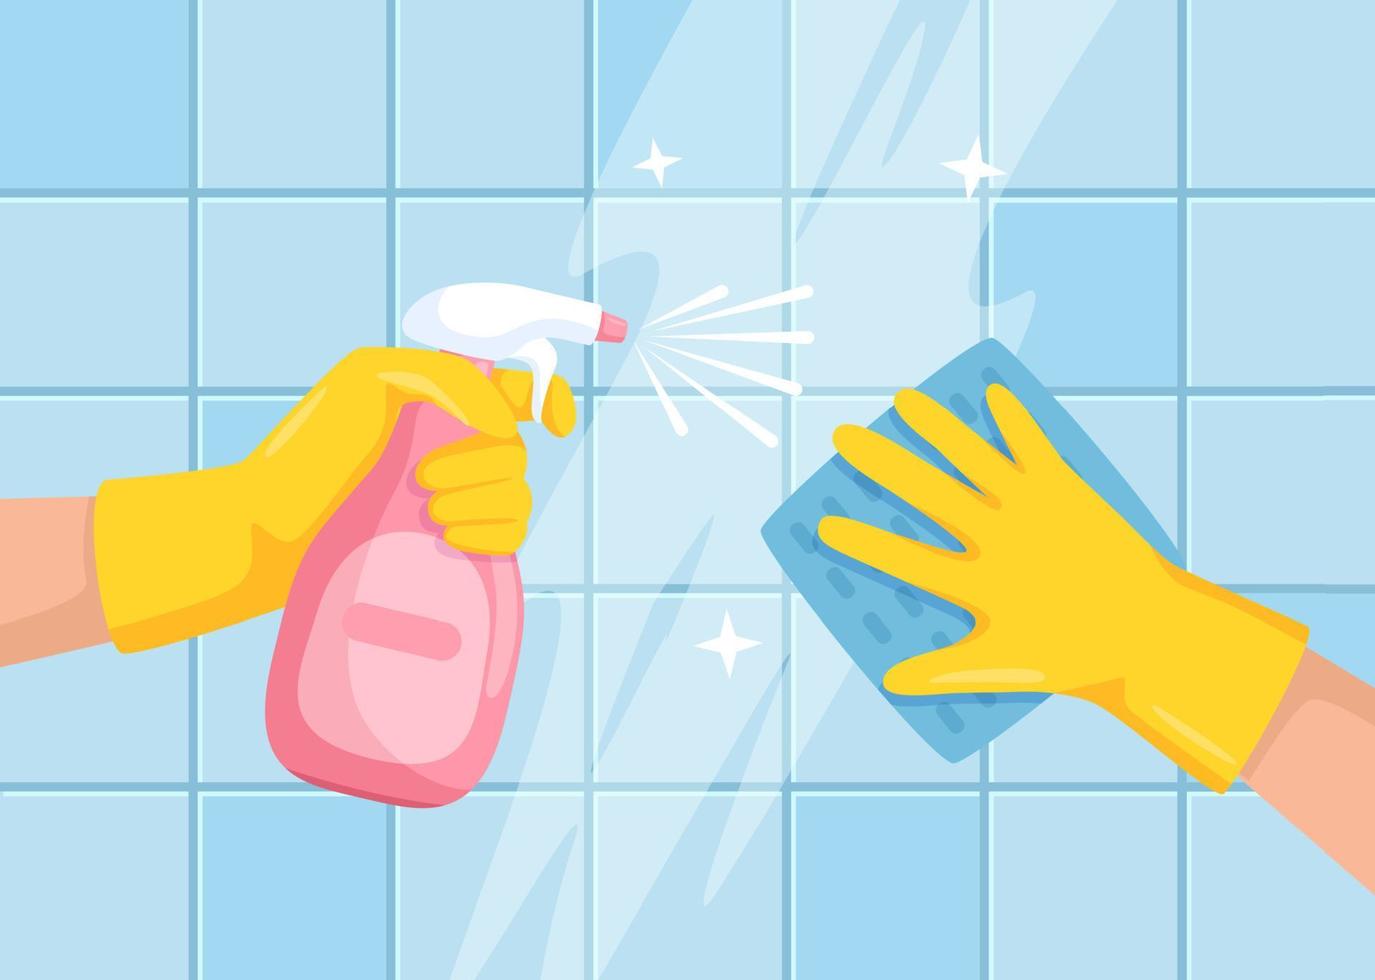 Cleaning surface. Hands with spray bottle and cloth wiping bathroom tile wall. Cleaning or disinfecting surfaces in house Vector illustration